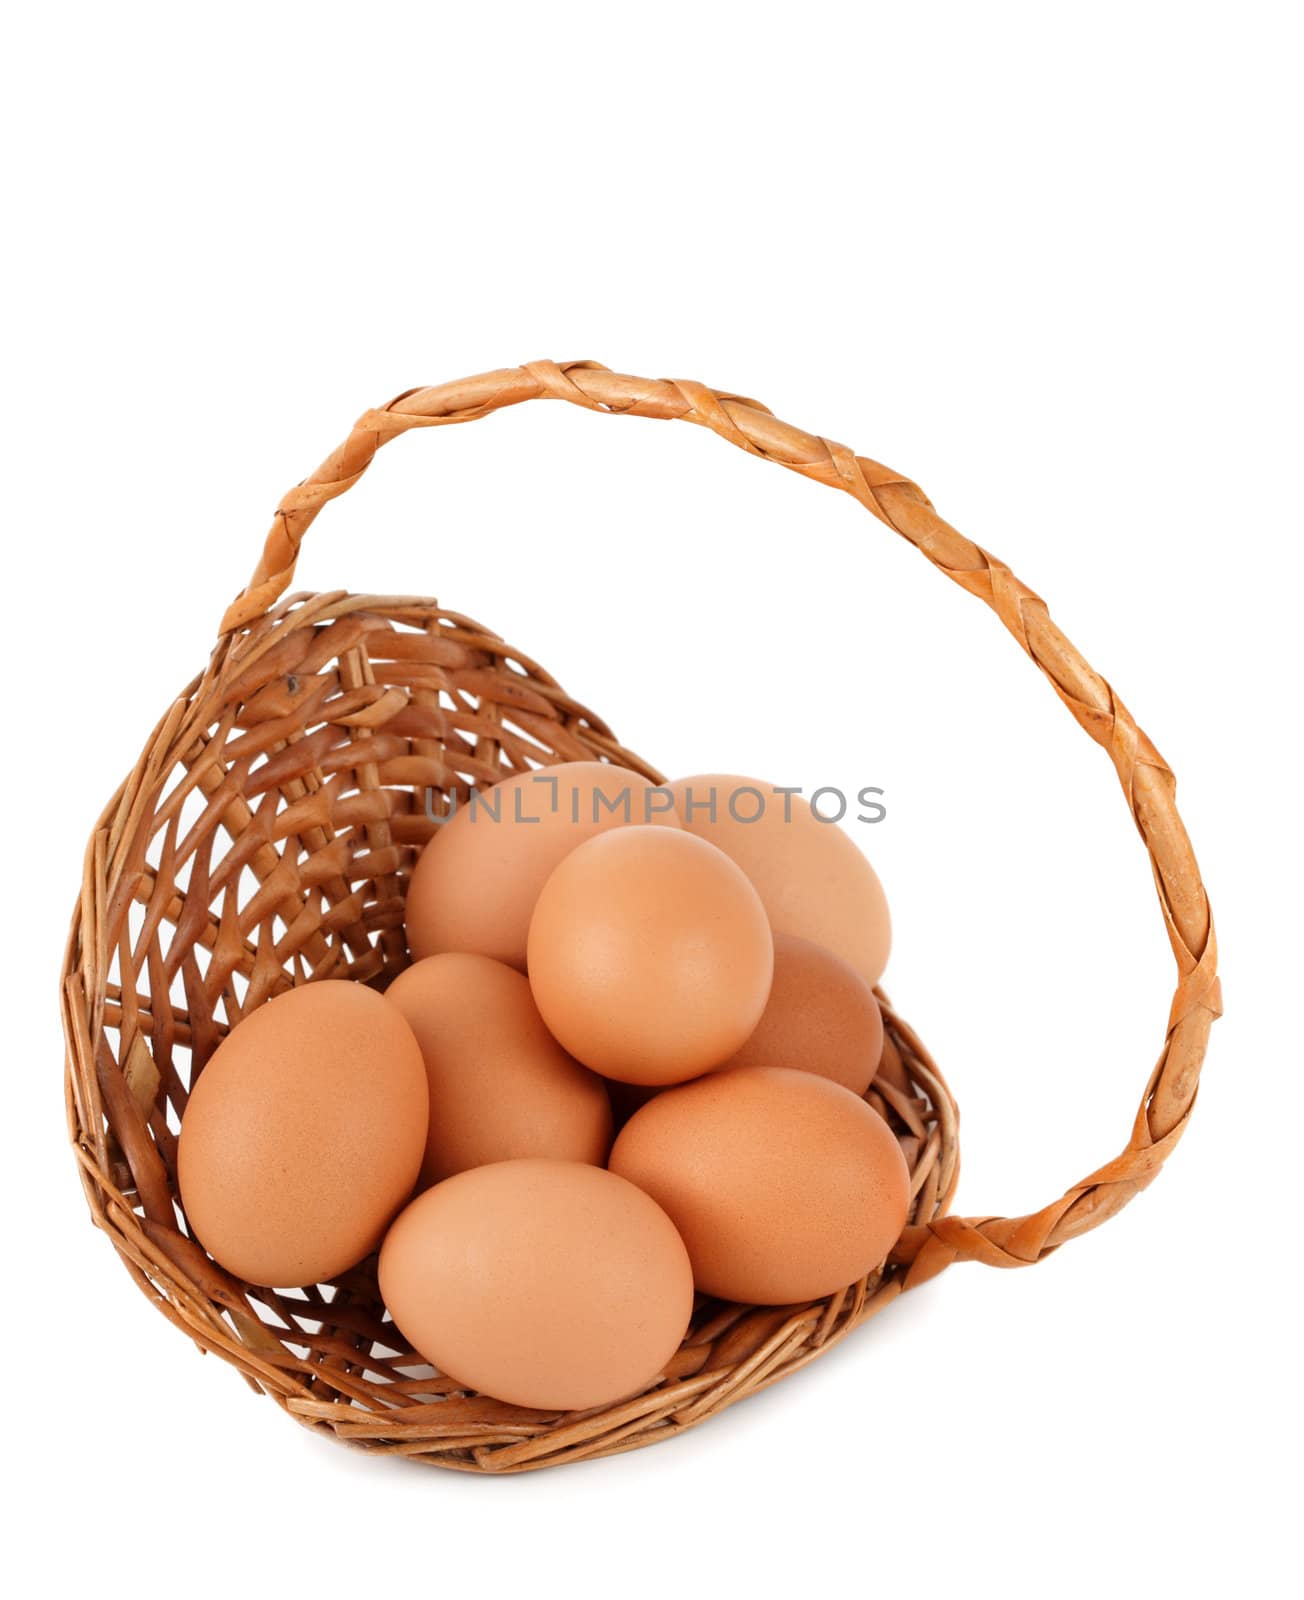 basket of brown eggs by lanalanglois